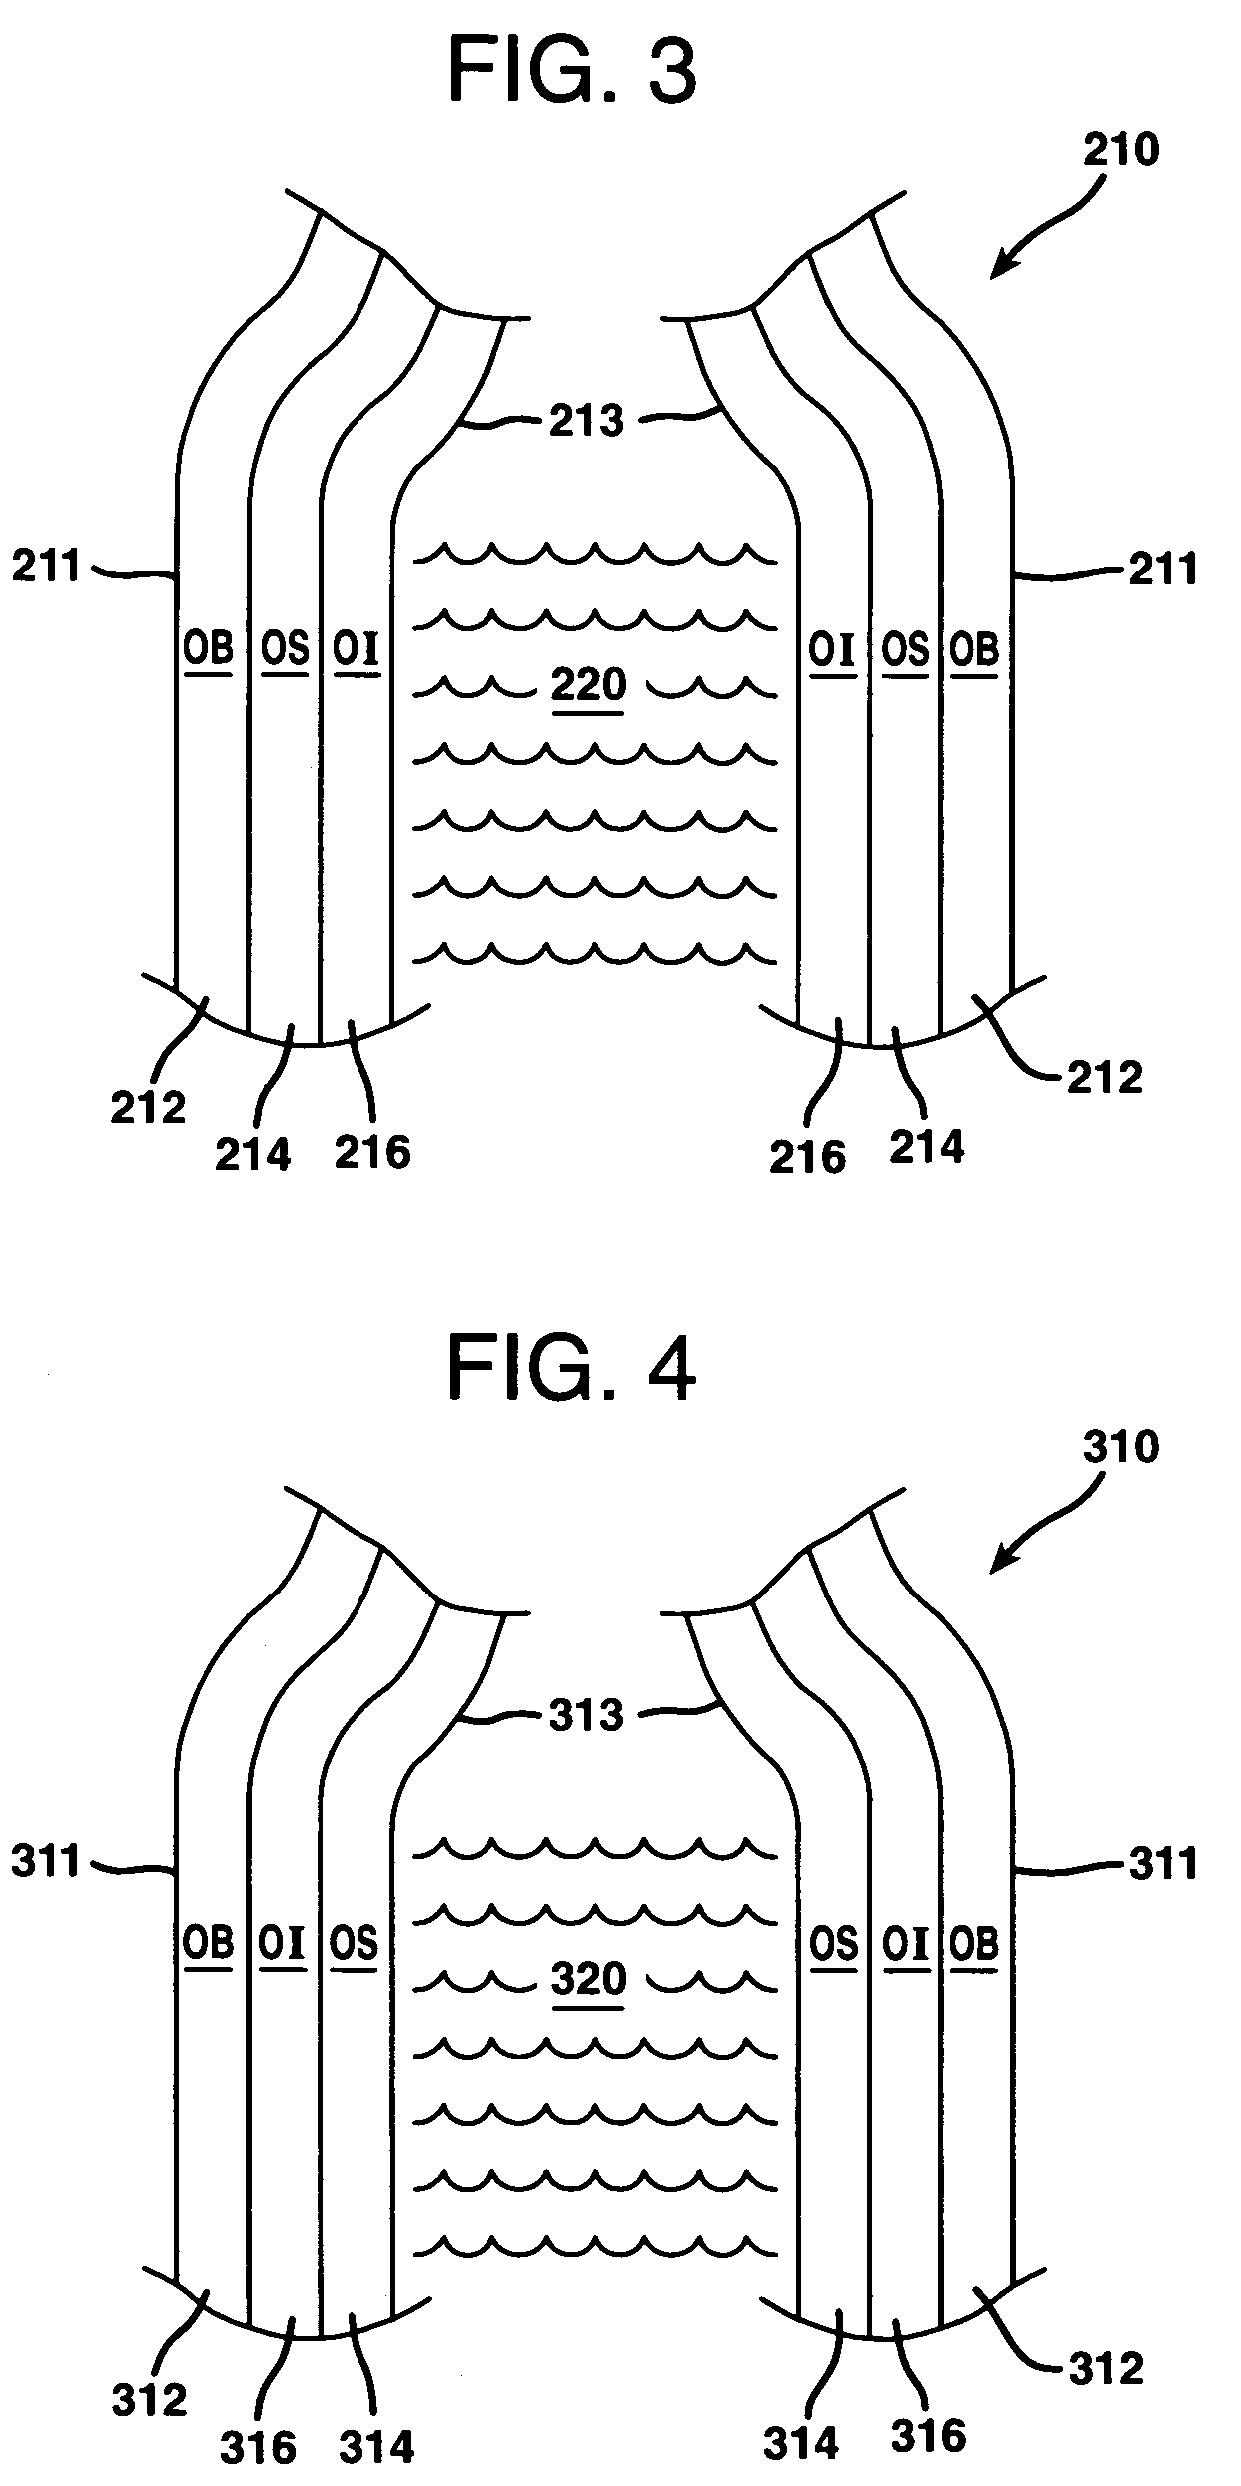 Oxygen detection system for a rigid container